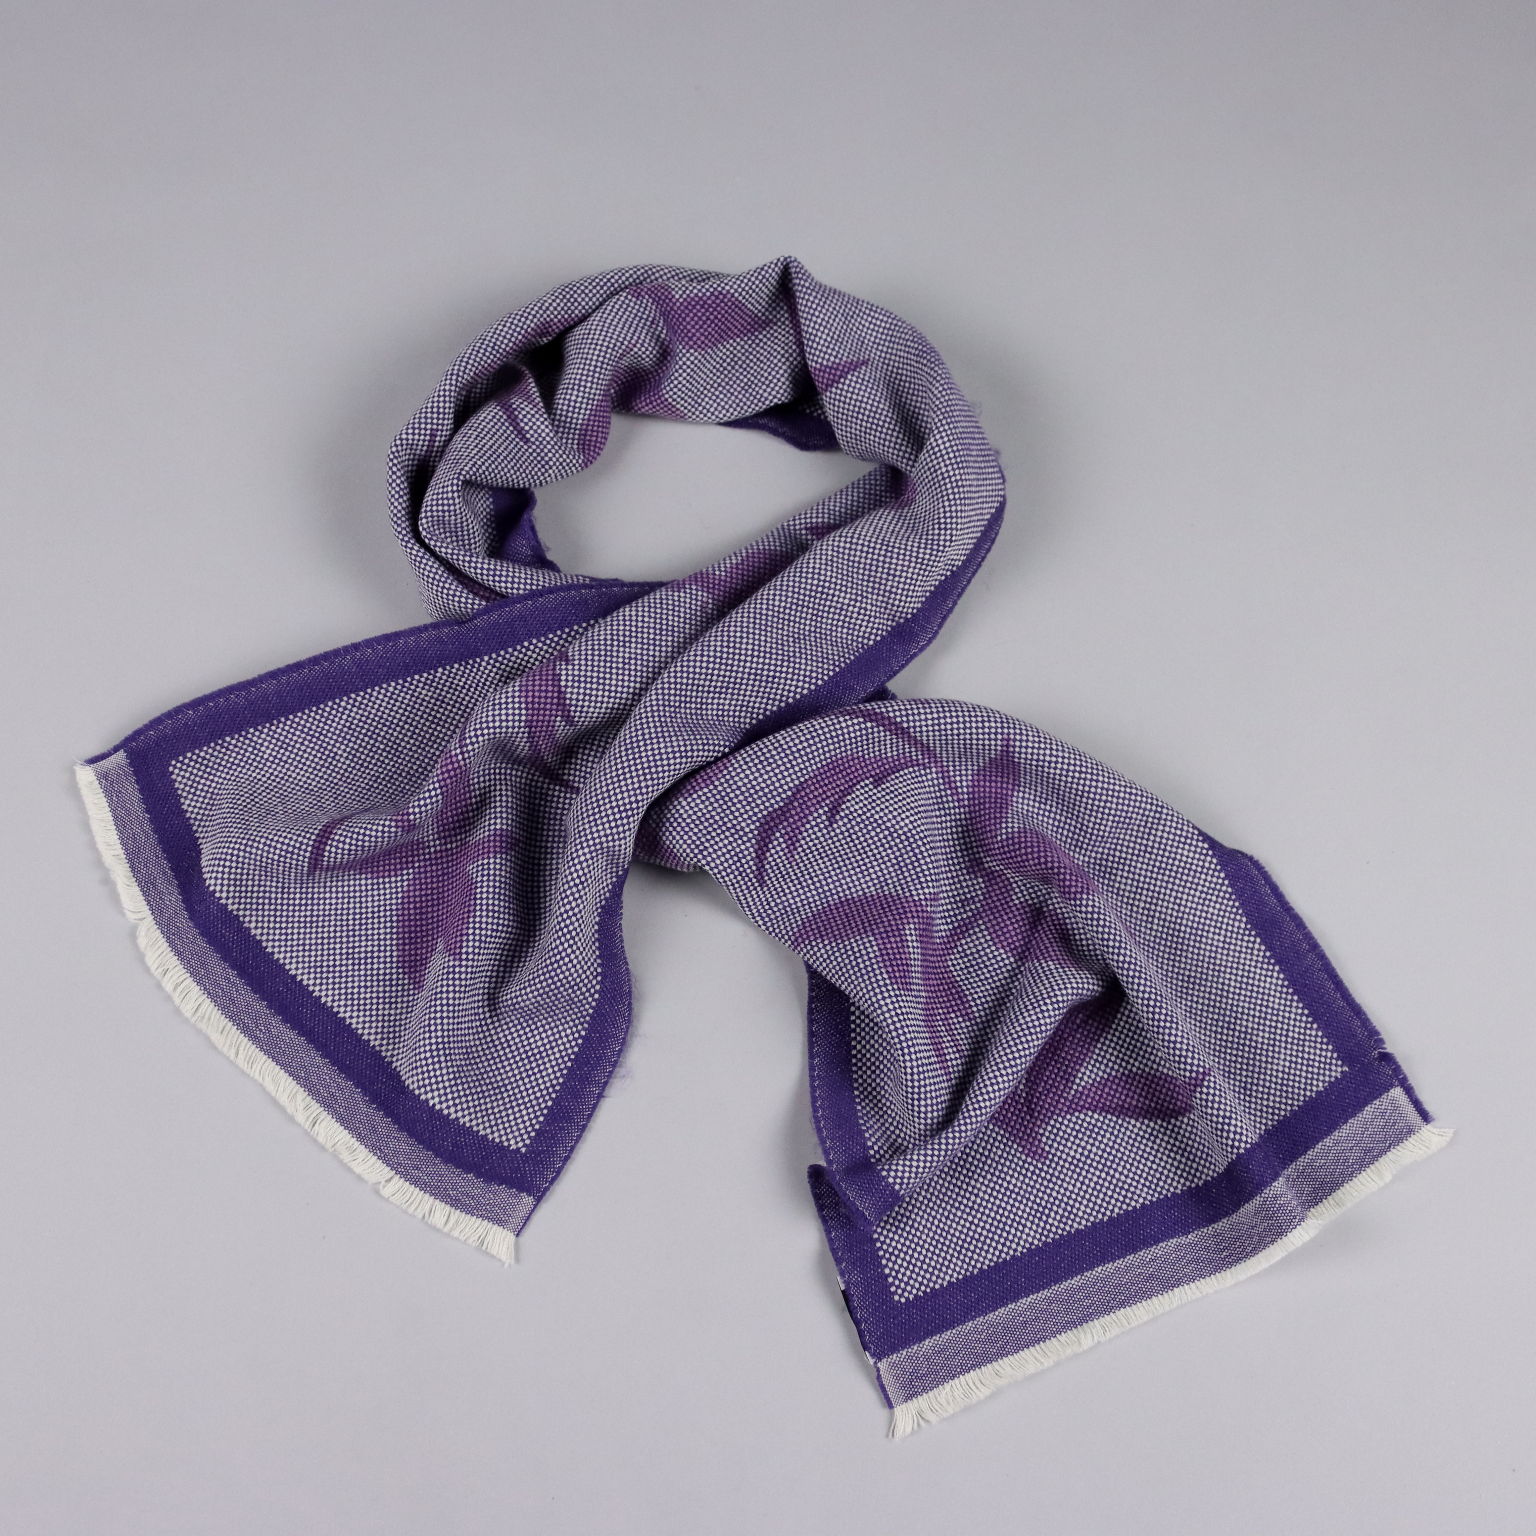 G. Armani Scarf Wool Italy, Clothing and Kits, Second hand, 